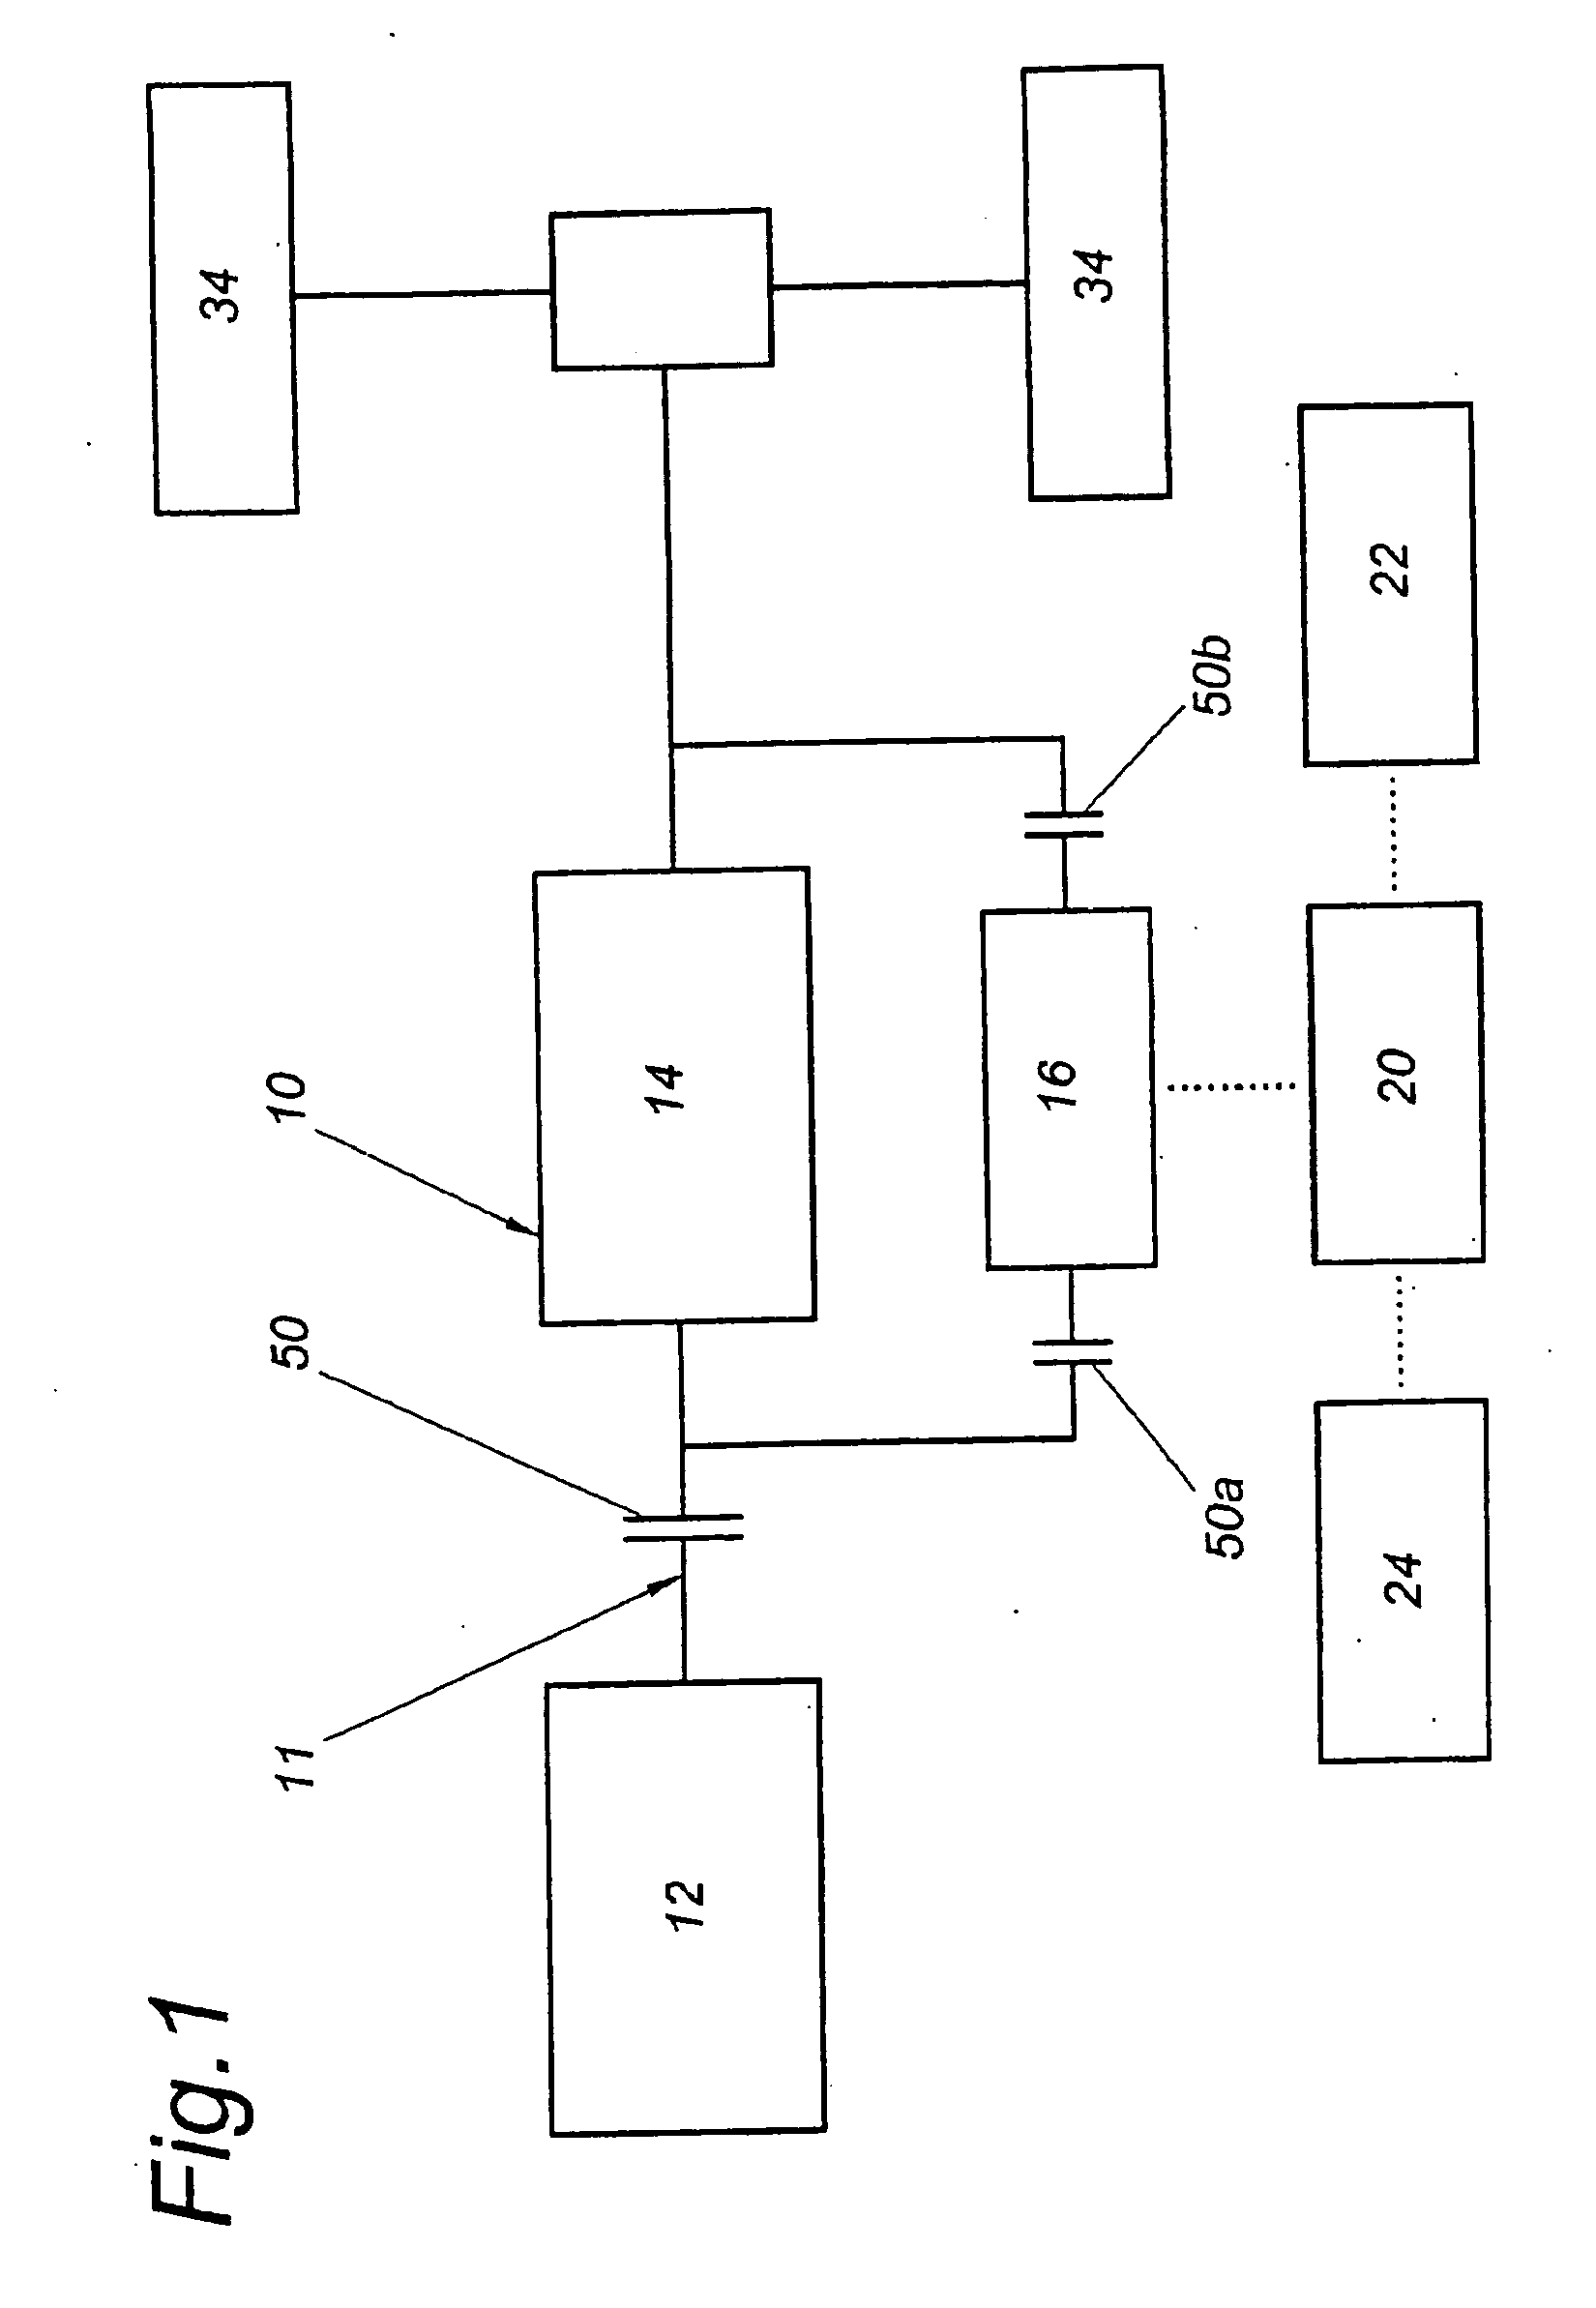 Method for operating a hybrid vehicle